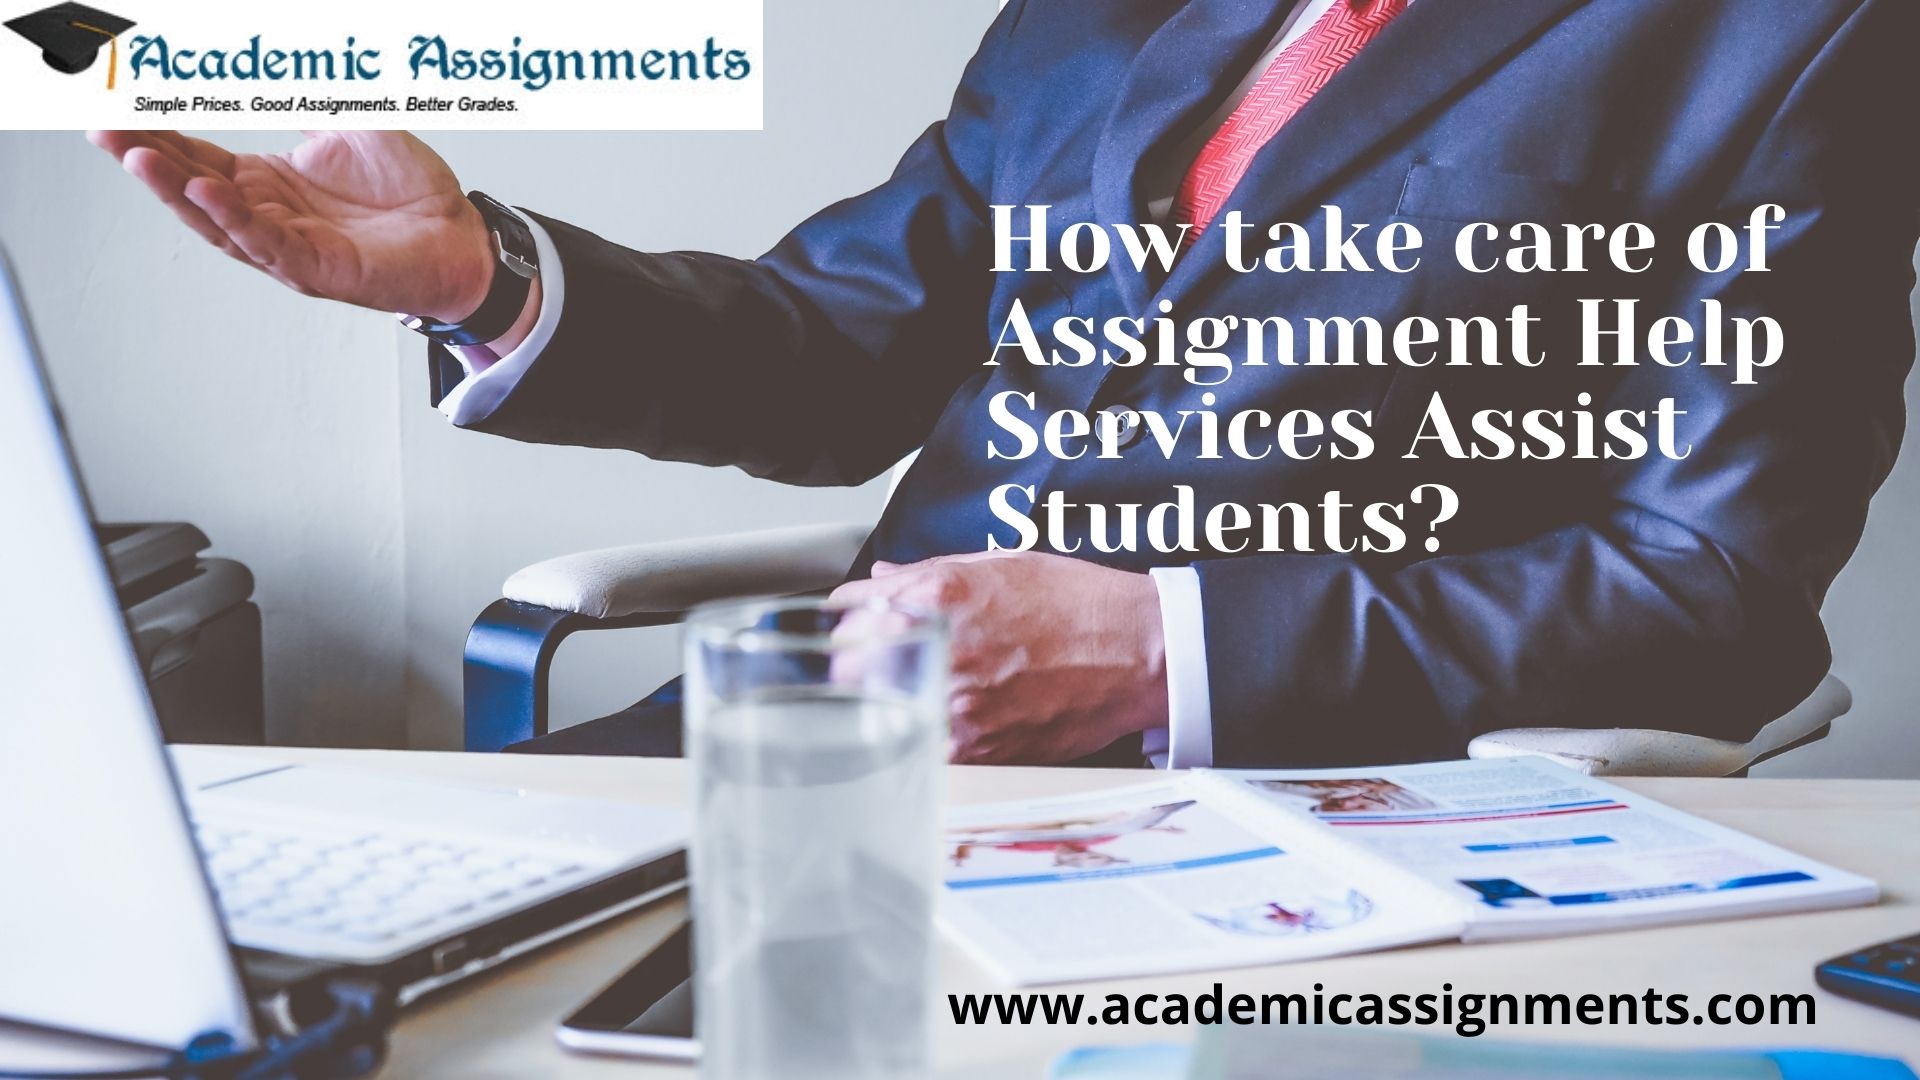 How take care of Assignment Help Services Assist Students